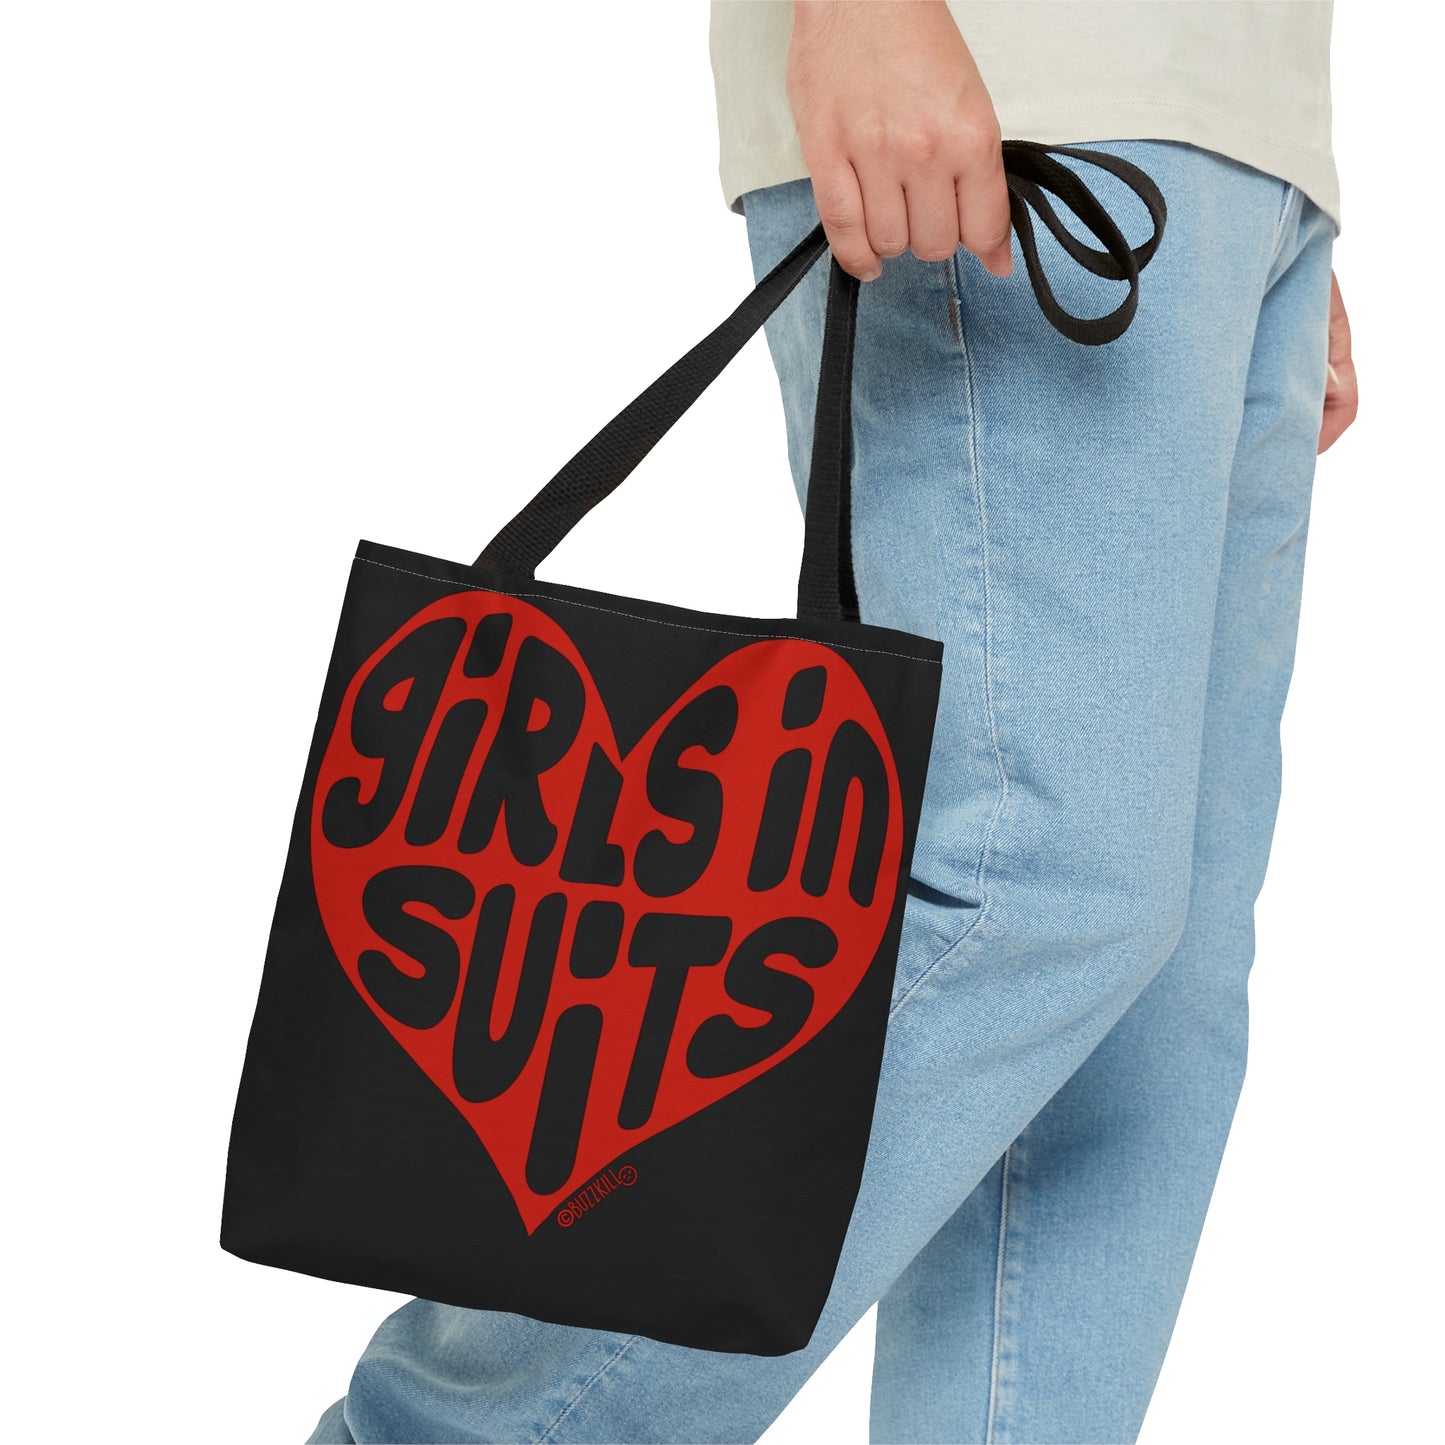 Girls In Suits Heart - Tote Bag